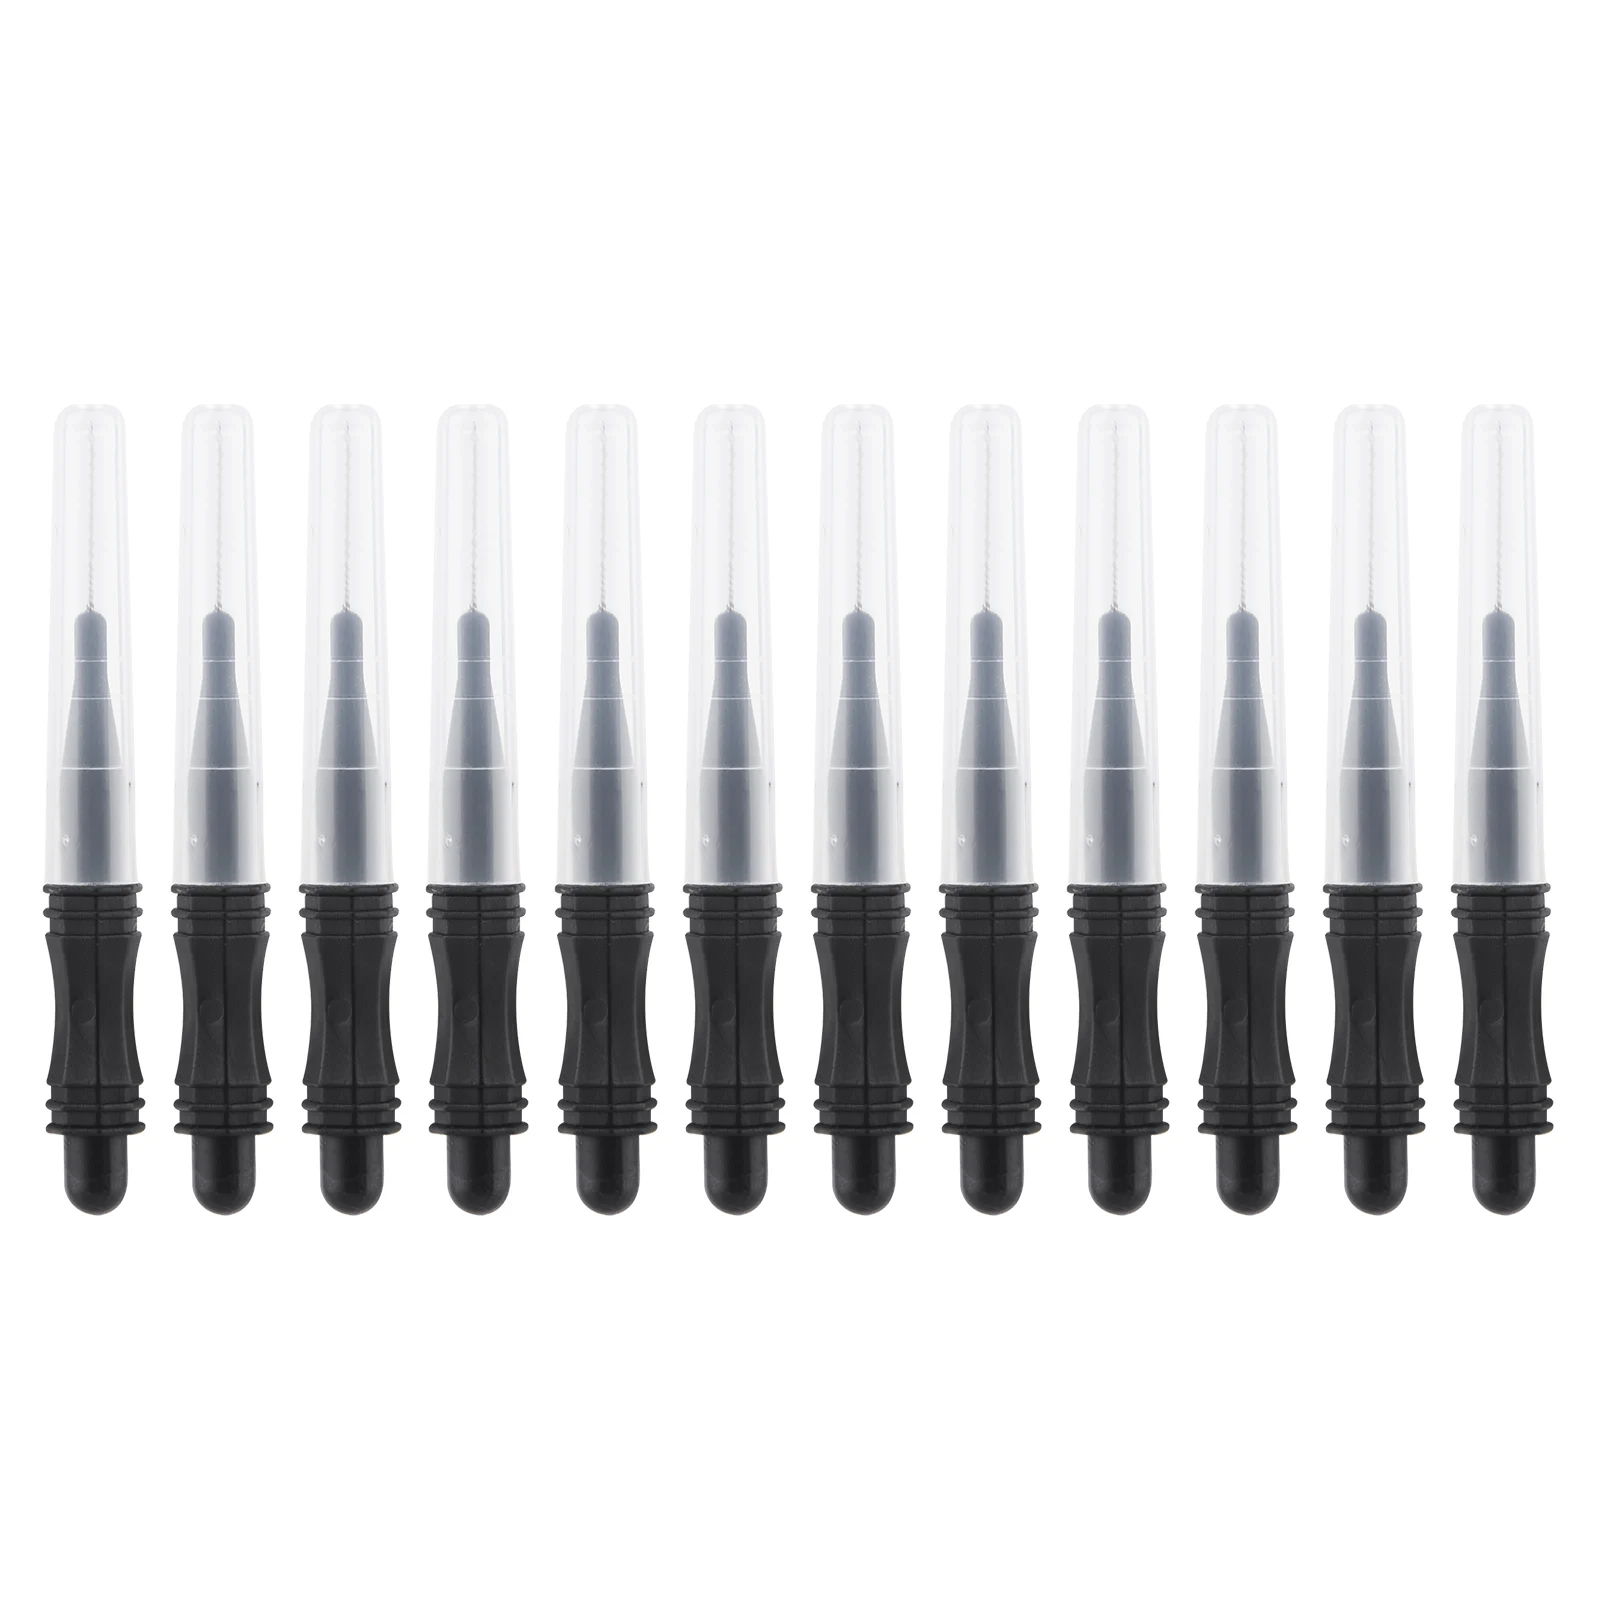 

12pcs Extension Easy Use Mascara Wand Makeup Tool For Eyelashes Eyebrows Cosmetic Home Reusable Practical Micro Brushes Durable